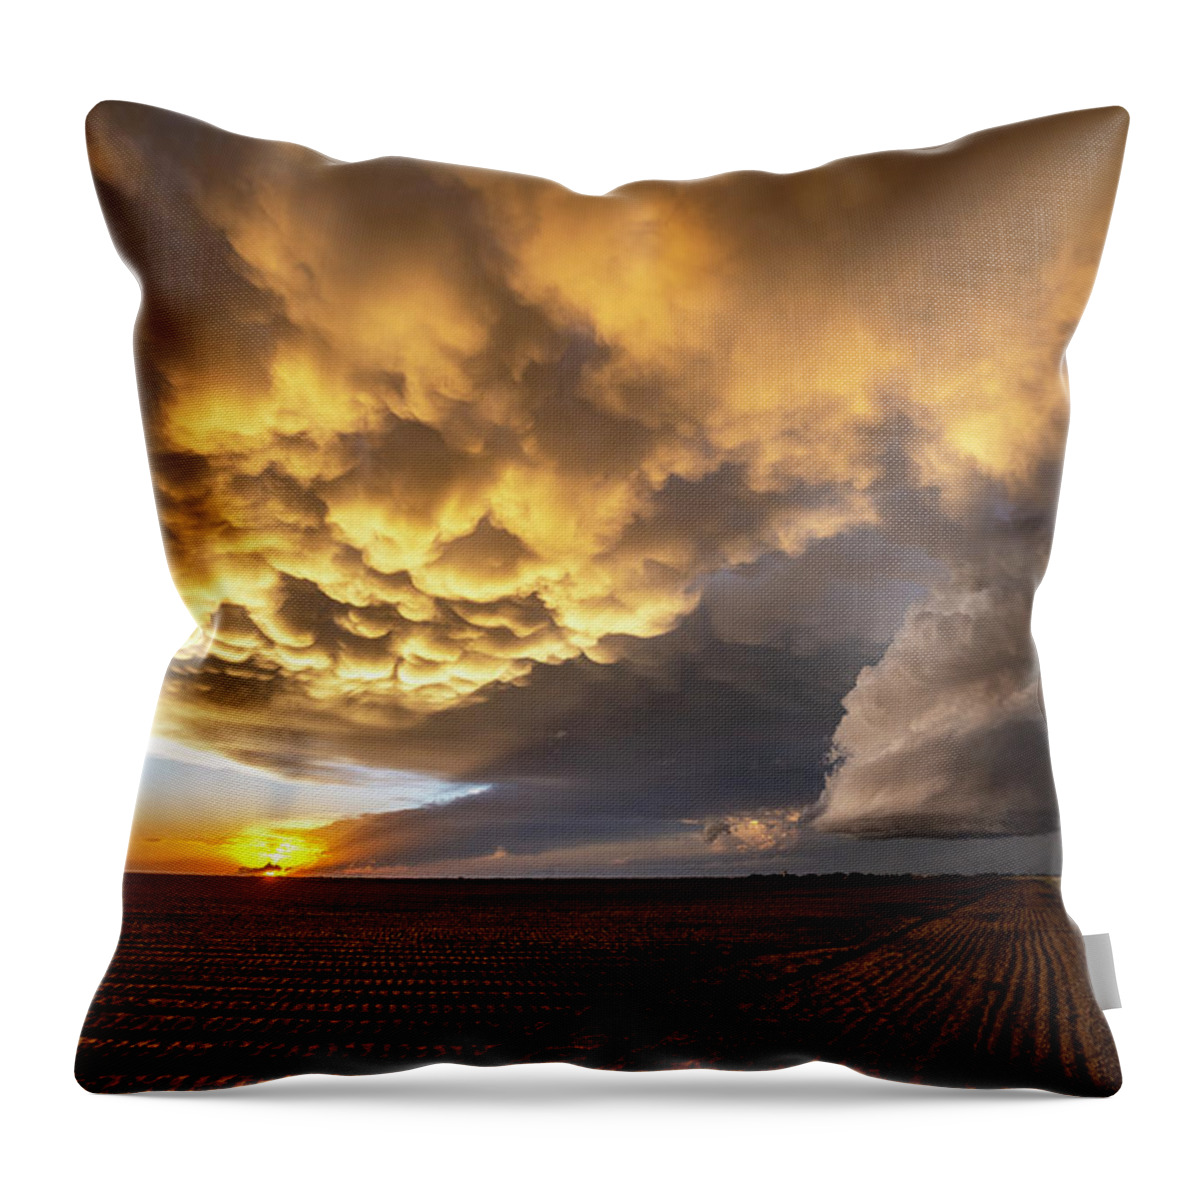 Supercell Throw Pillow featuring the photograph Dryline Sunset by Marcus Hustedde